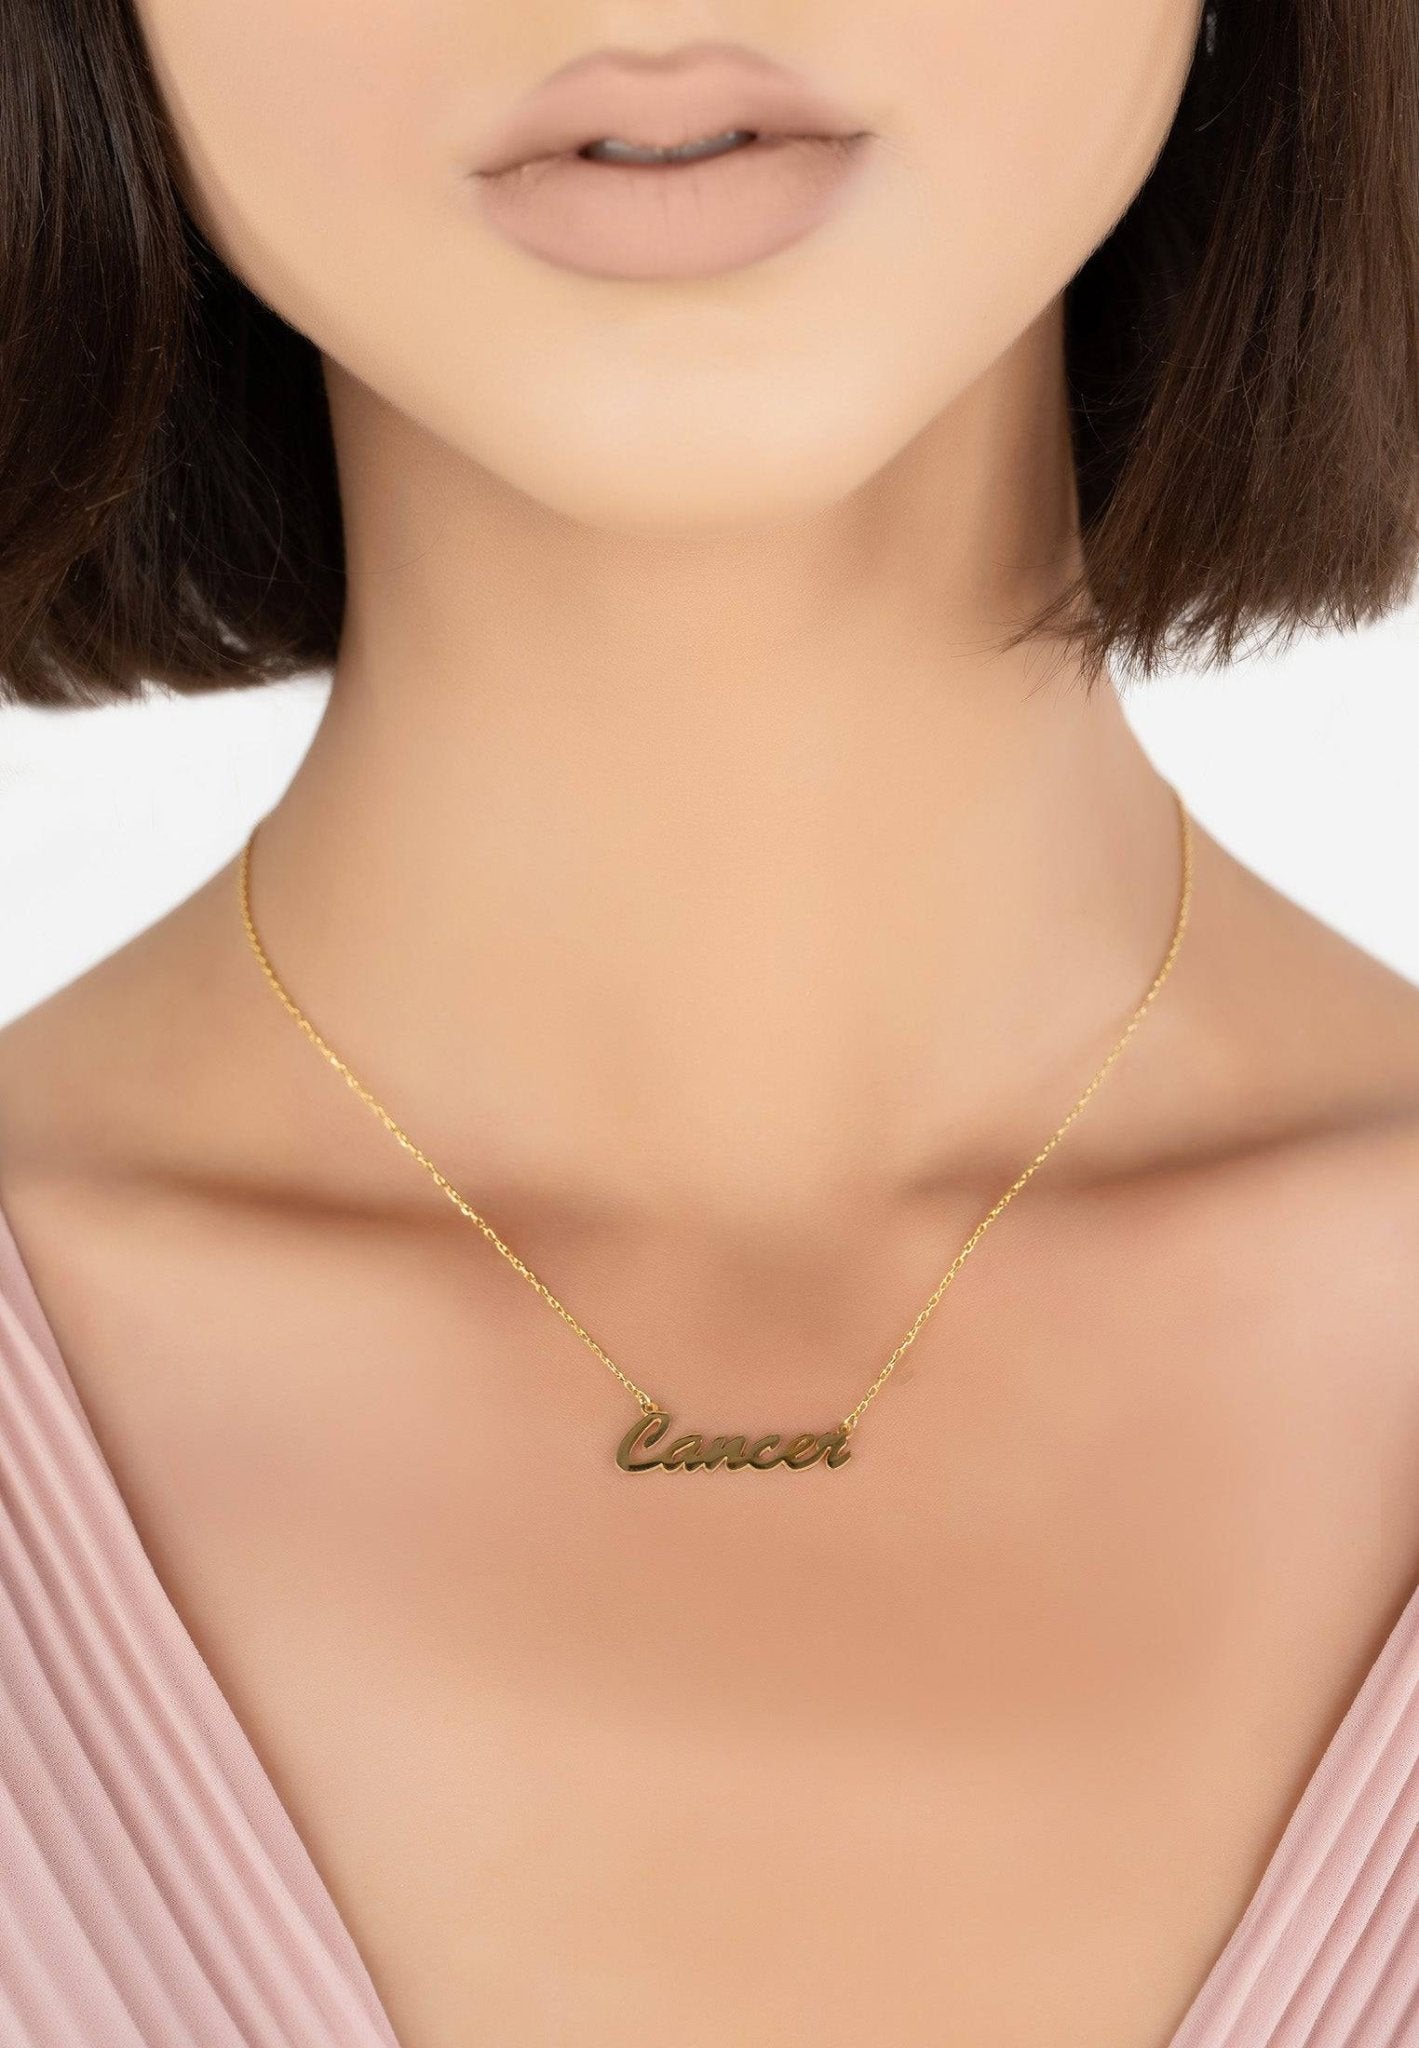 Personalized Necklaces - Zodiac Star Sign Name Necklace Gold Cancer 